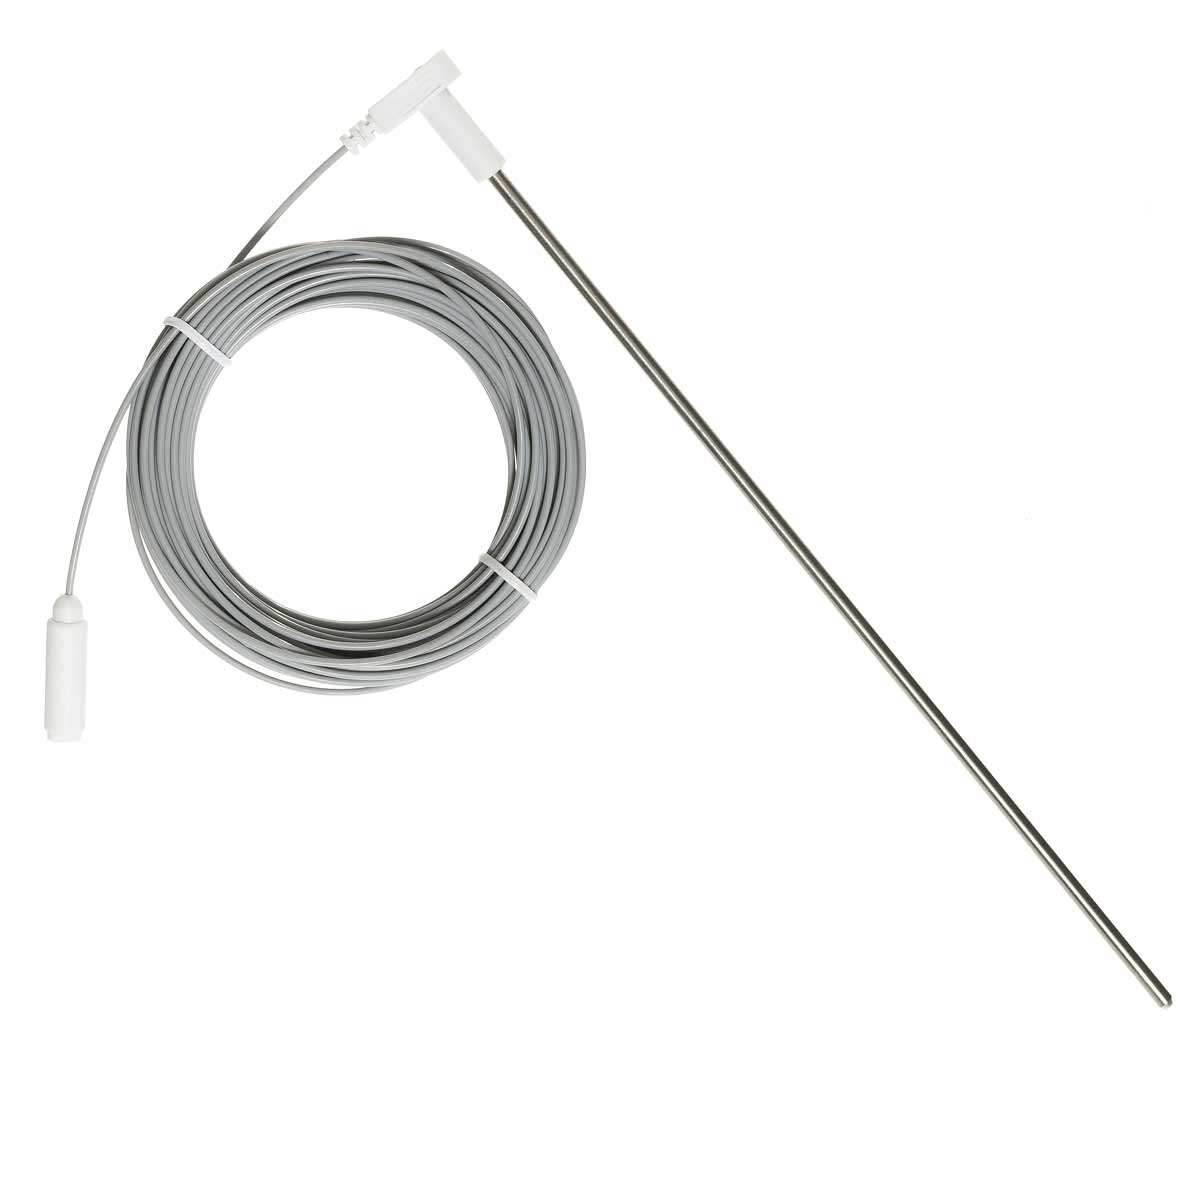 Ground rod with 15 m cord